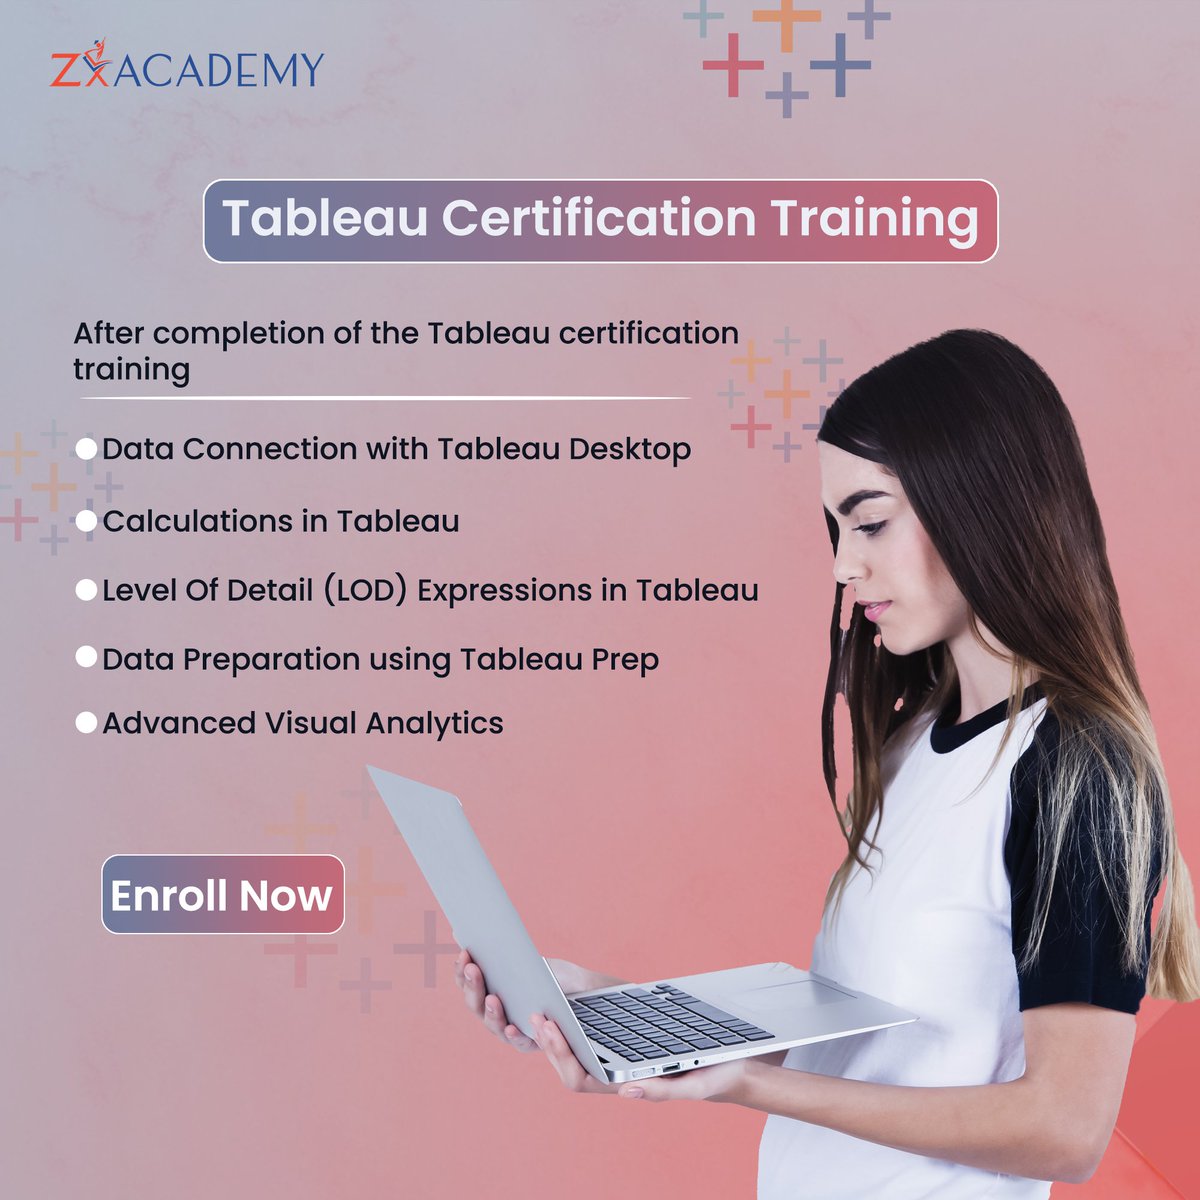 📷 Elevate Your Data Skills with ZX Academy Tableau Certification Training! 📷📷
#TableauTraining #DataVisualization #Certification #ZXAcademy #DataSkills #AnalyticsTraining #DataViz #TableauServe #TableauCloud #DataVizChallenge